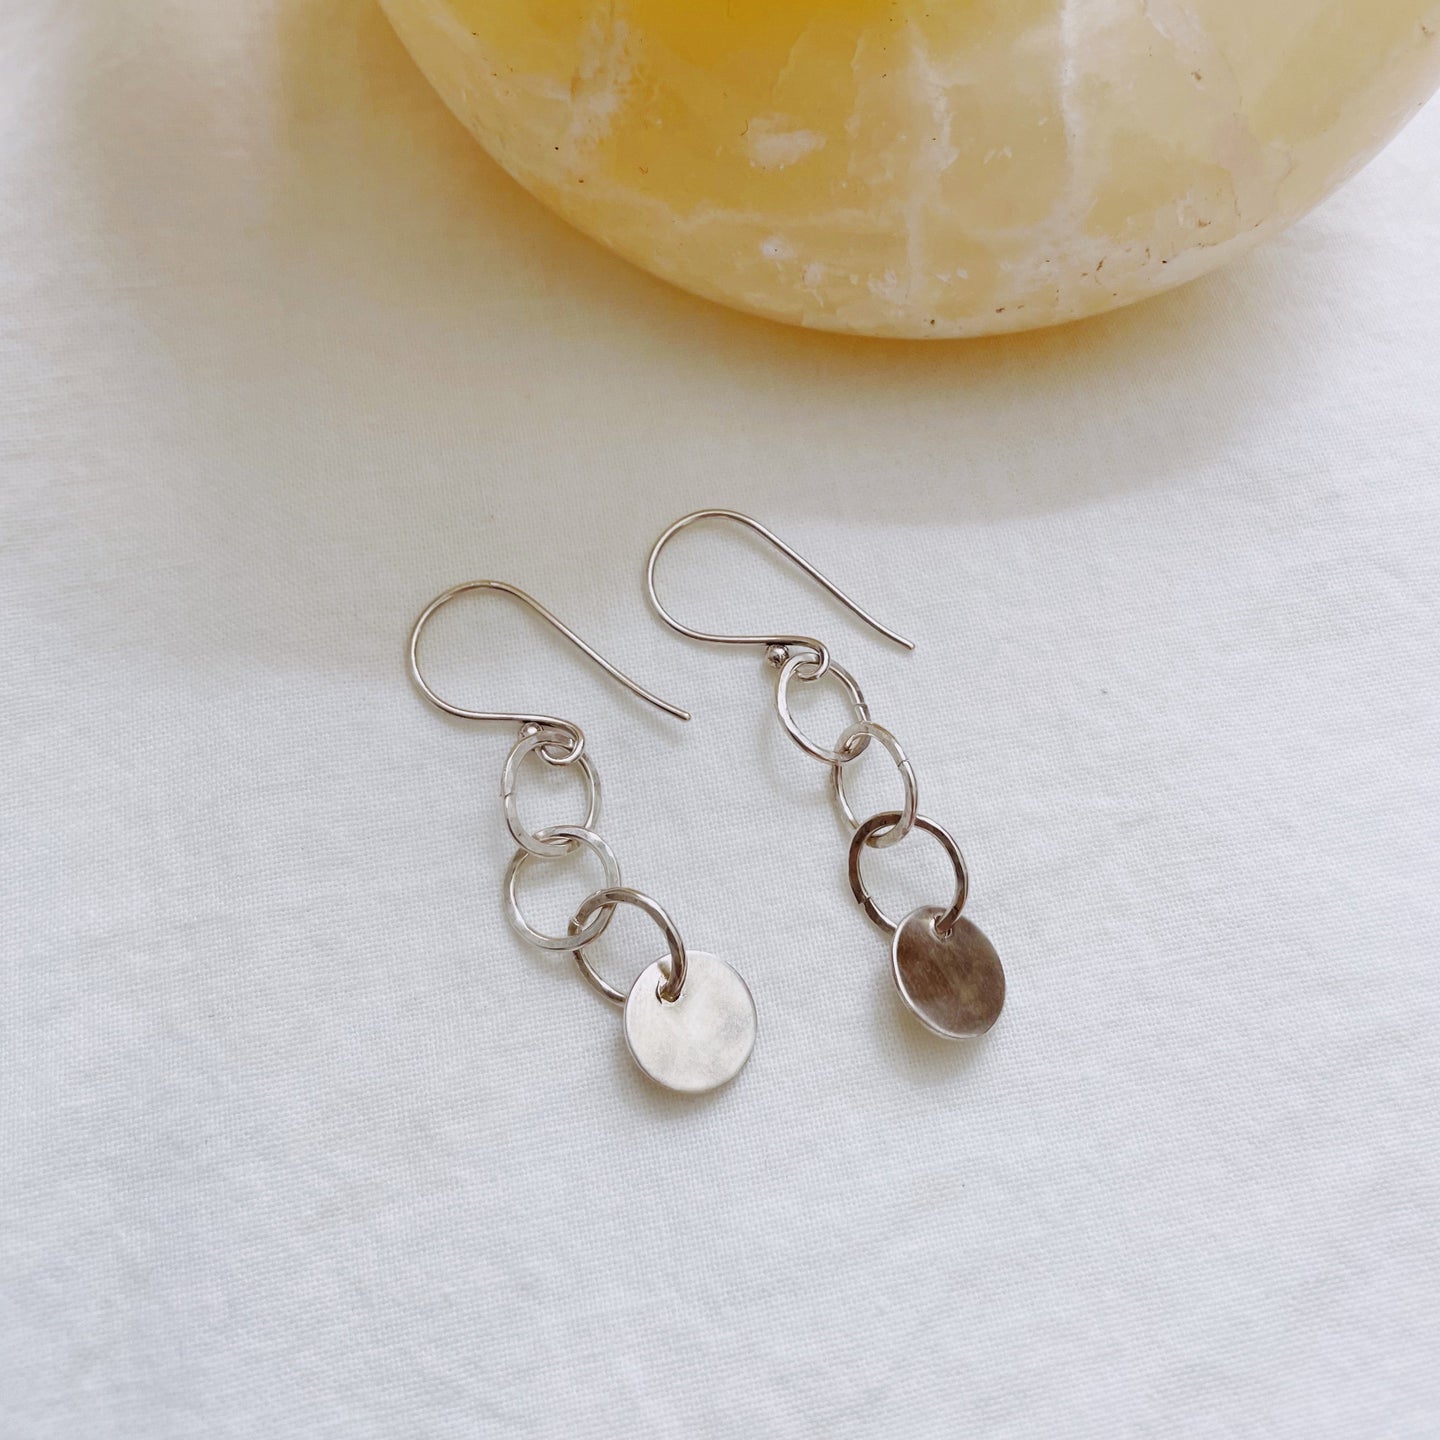 Sun Earrings (sterling silver or gold- filled)